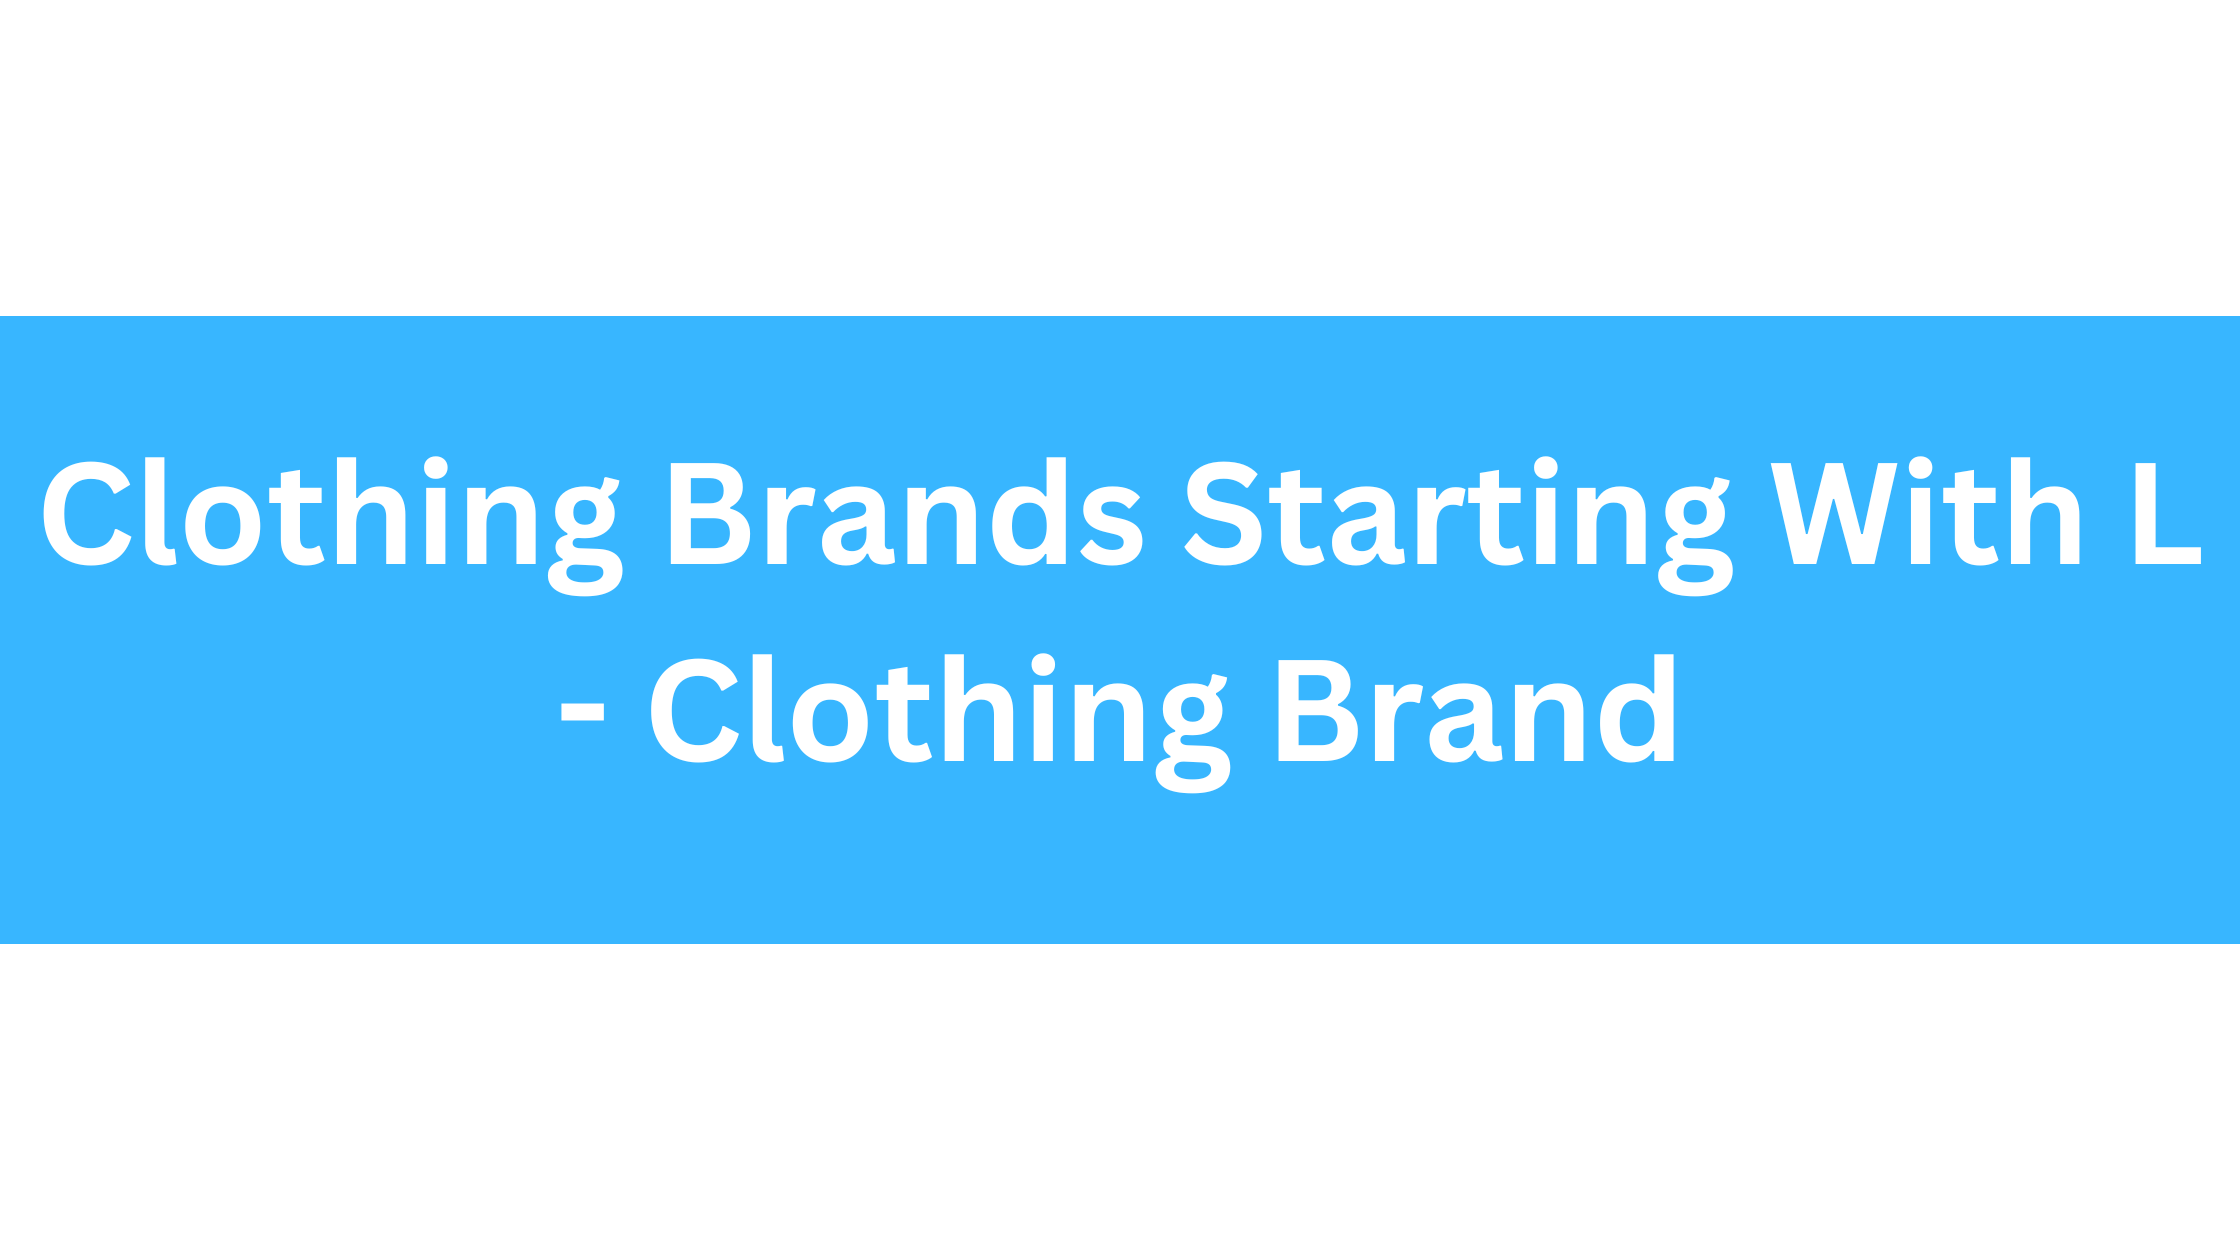 Clothing Brands Starting With L